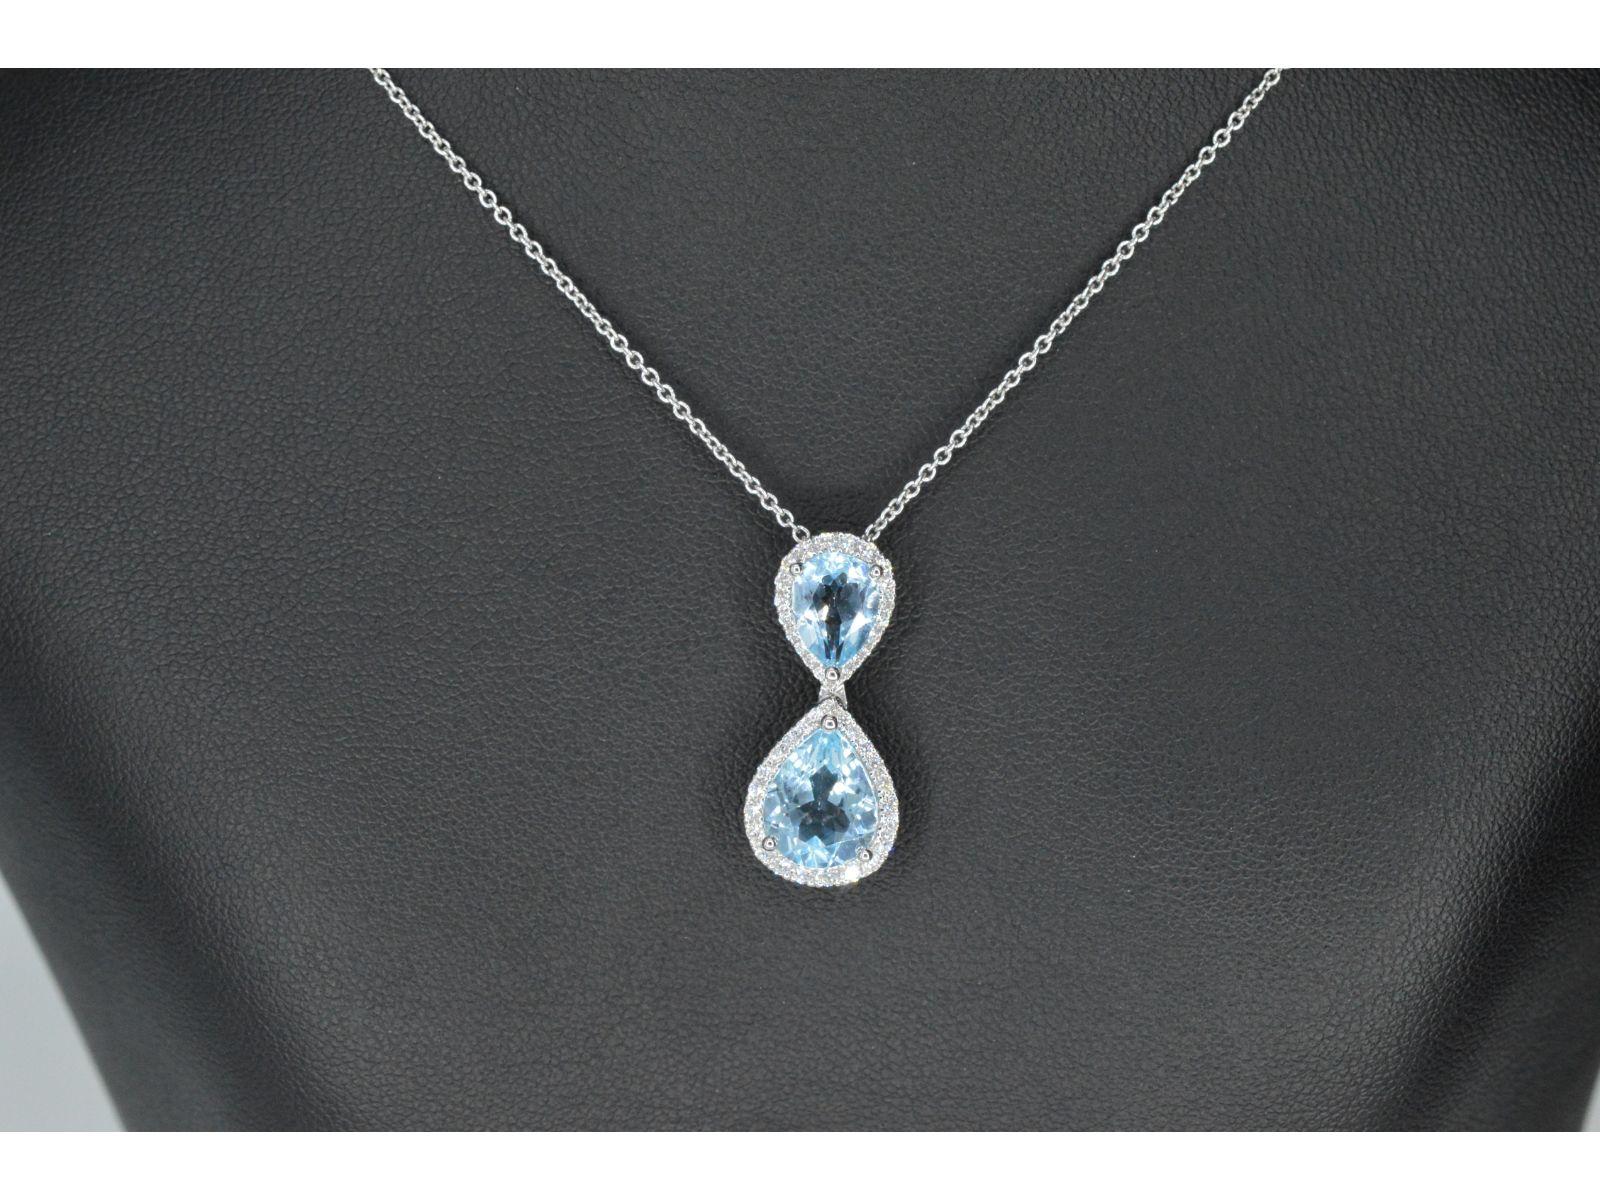 Diamonds: Naturally shiny; Weight: 0.50 carat; Cut: Brilliant; Colour: F-G; Purity: 
VS; Grinding quality: Very good; Gemstones: Topaz; Weight: 3.50 / 2.00 carat; Grinding shape: Drop/pear shape; Color: Swiss Blue; Jewel: Pendant (excl. Necklace);